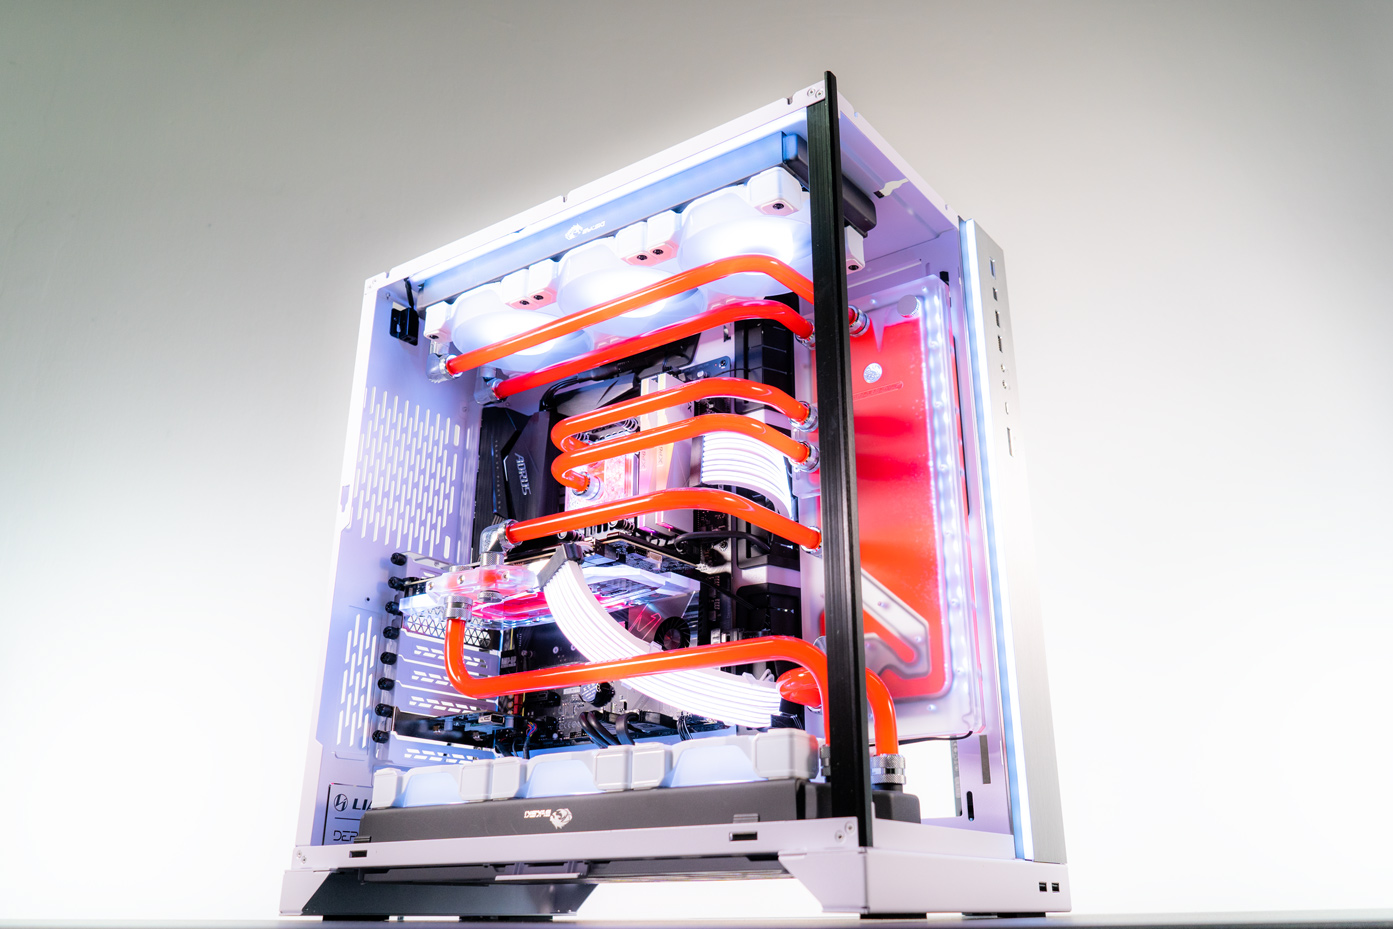 aftershock custom pc build - ultracore pc with bright red custom loop